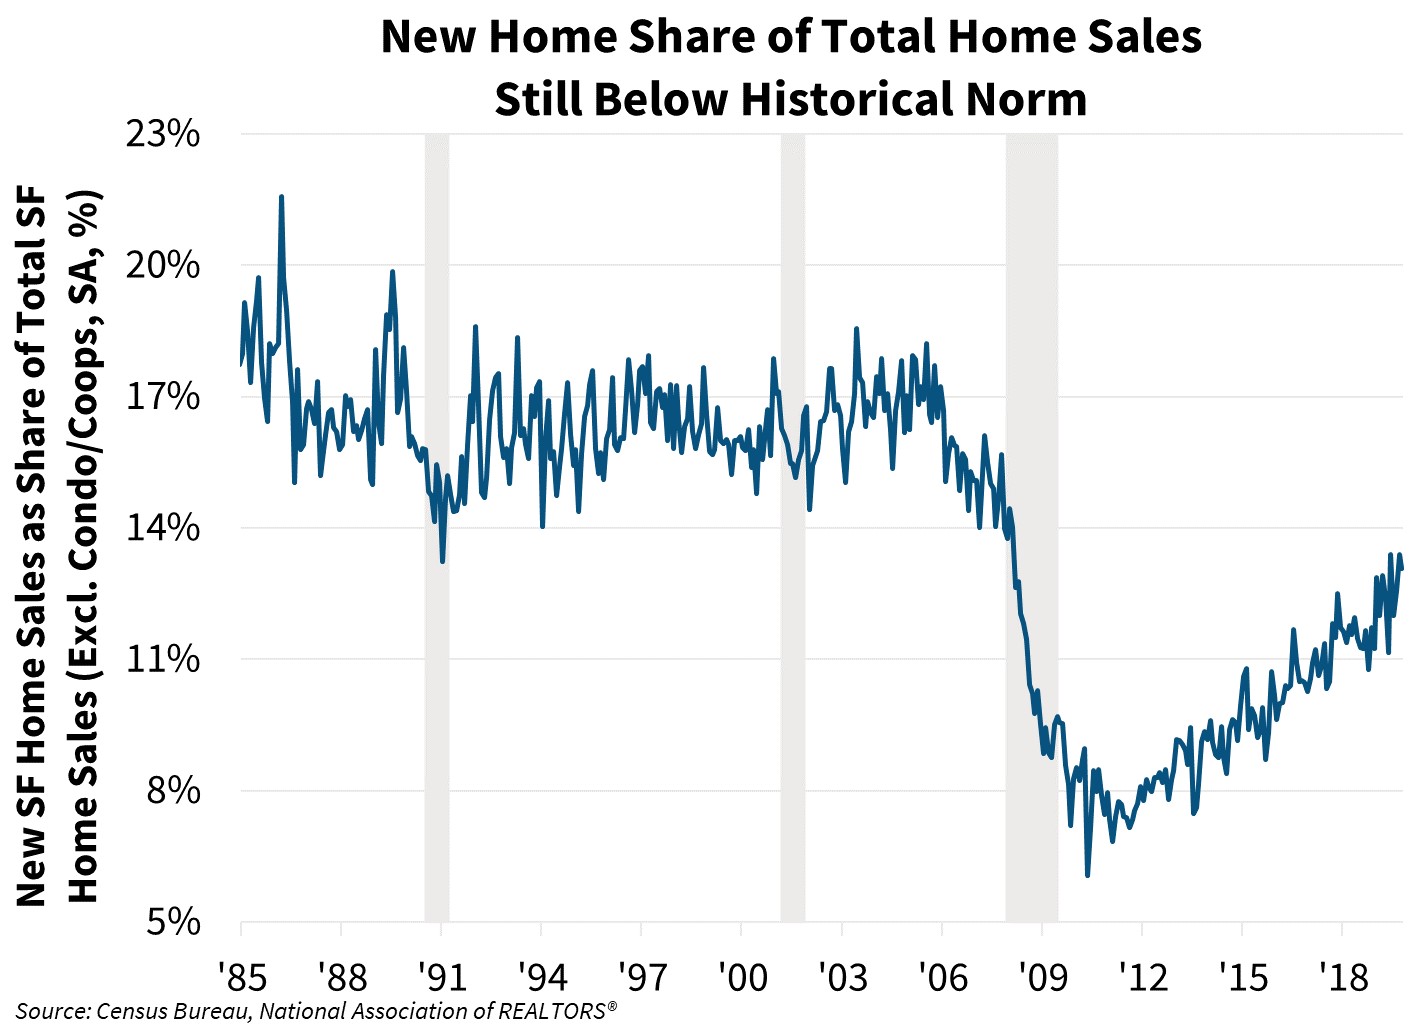 New Home Share of Total Home Sales Still Below Historic Norm